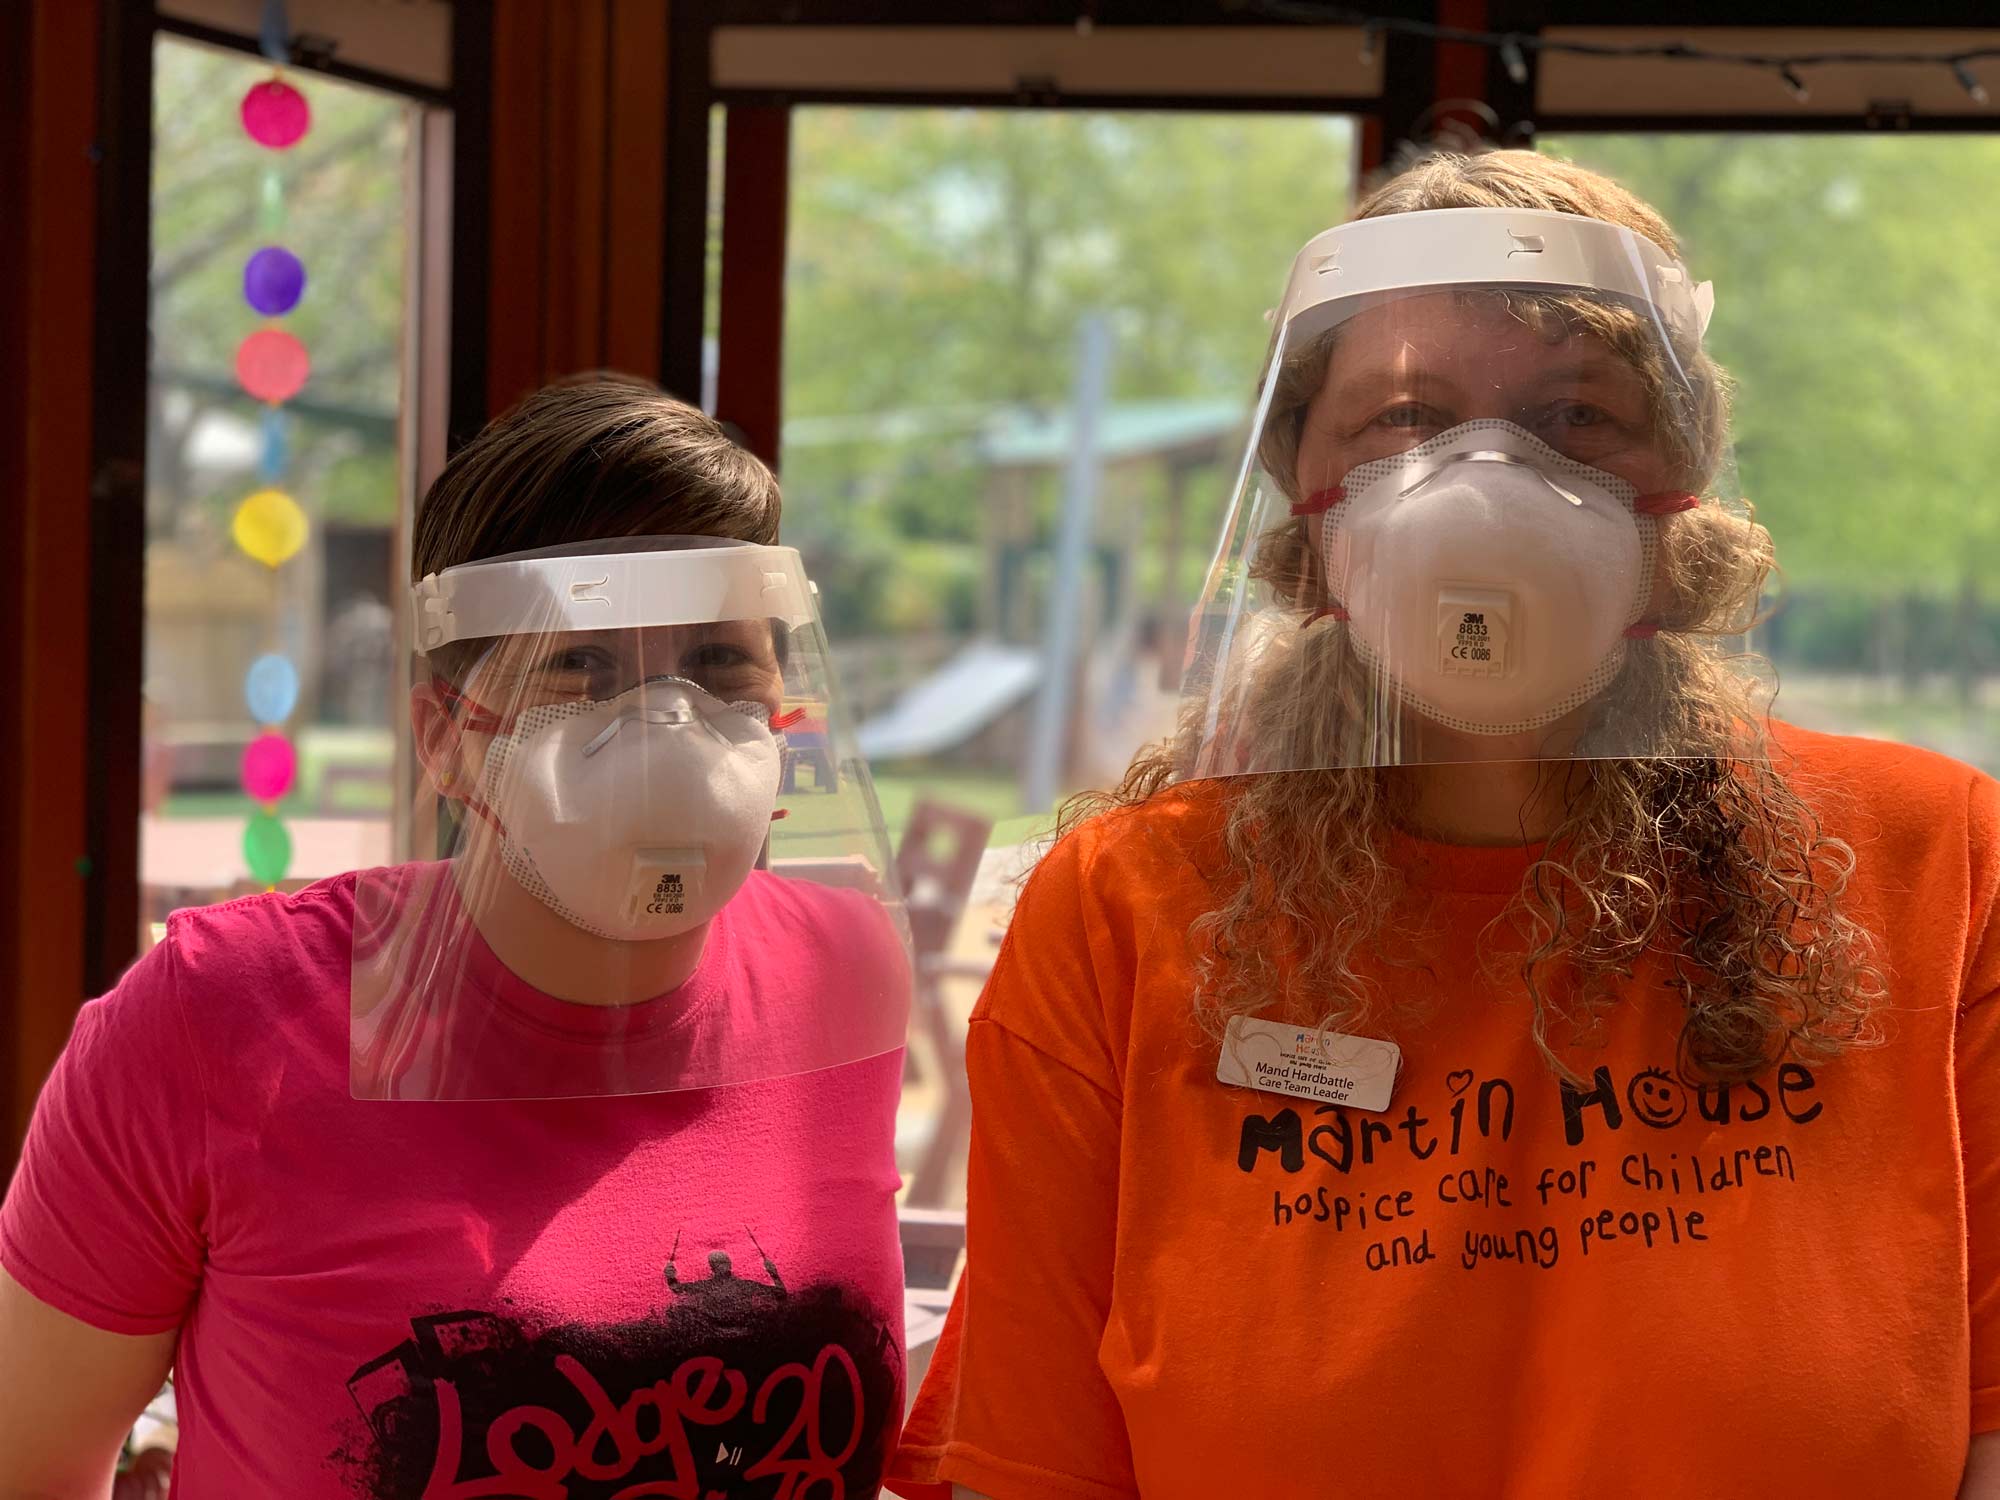 Two of Martin House’s care team in some of the PPE they will wear while caring for children.